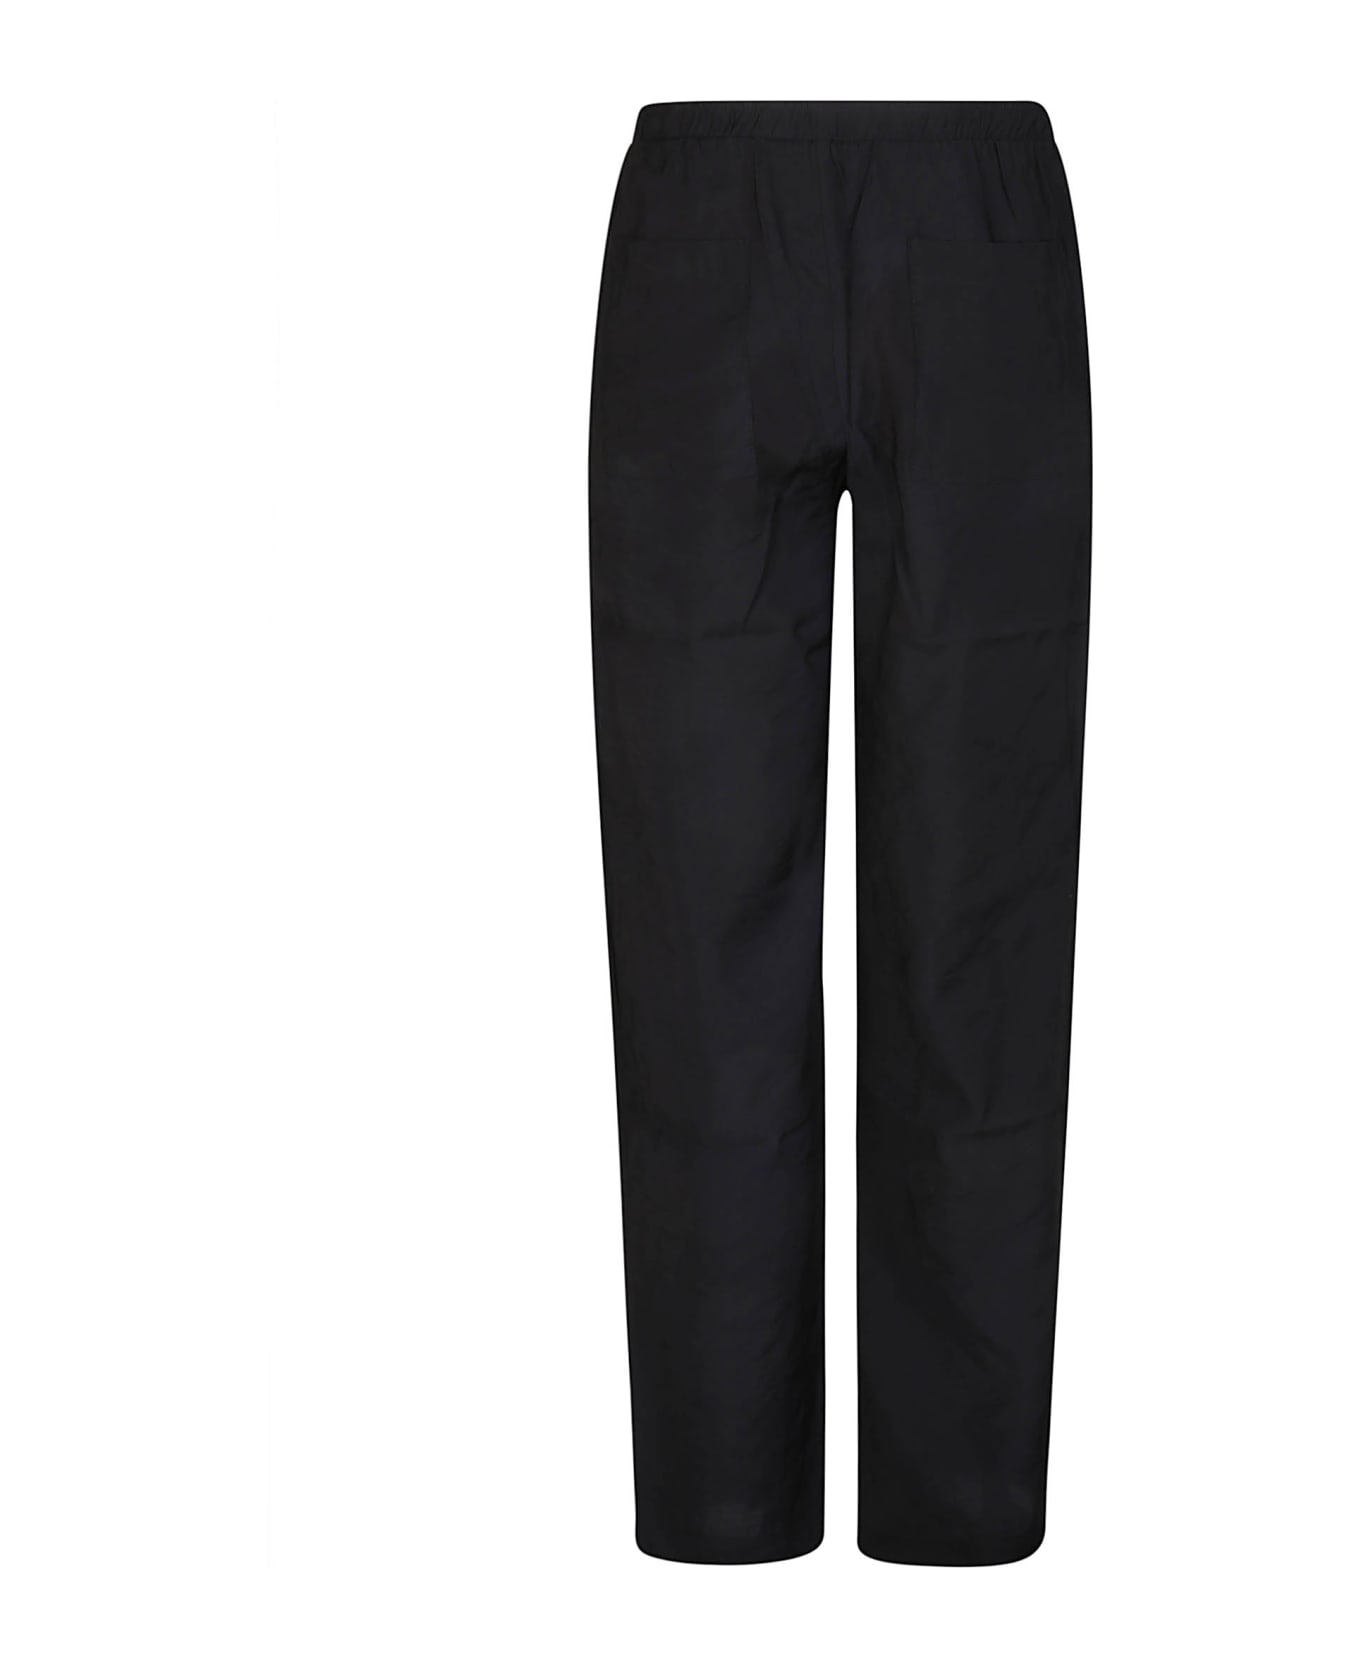 Family First Milano Soft Cupro Pant - BLACK ボトムス